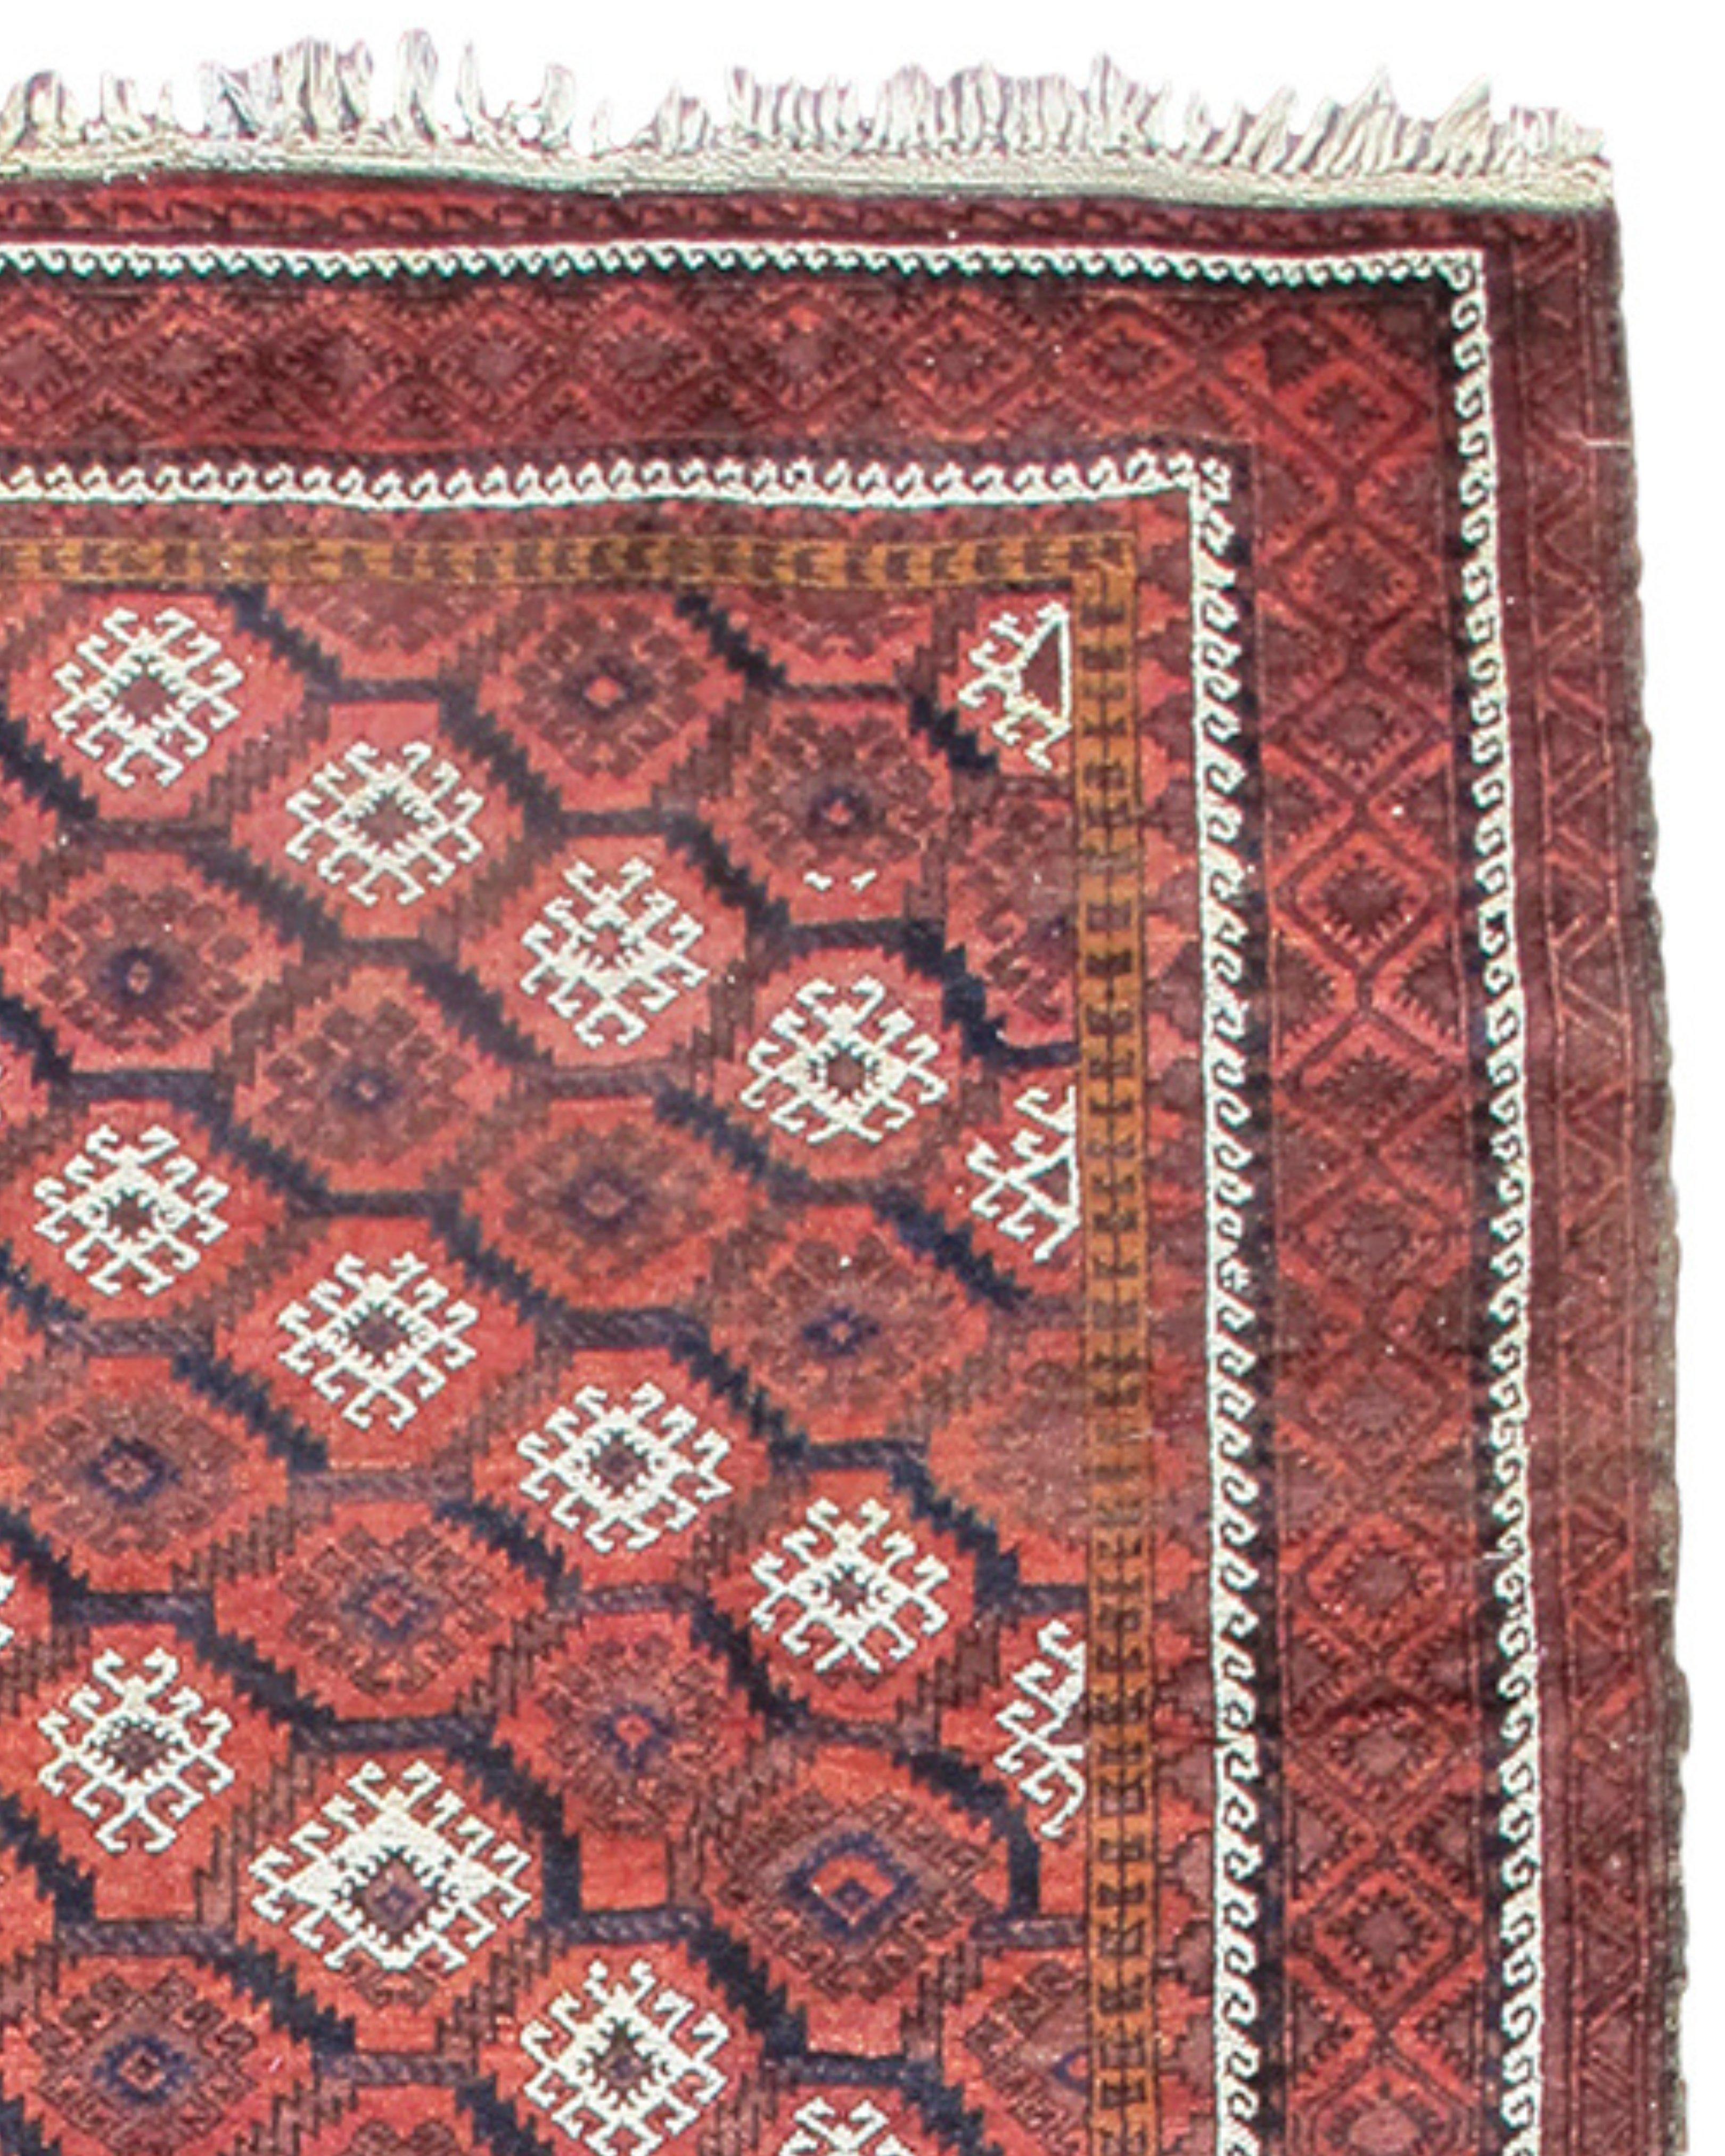 Antique Afghan Baluch Rug, Early 20th Century

Additional Information:
Dimensions: 10'2